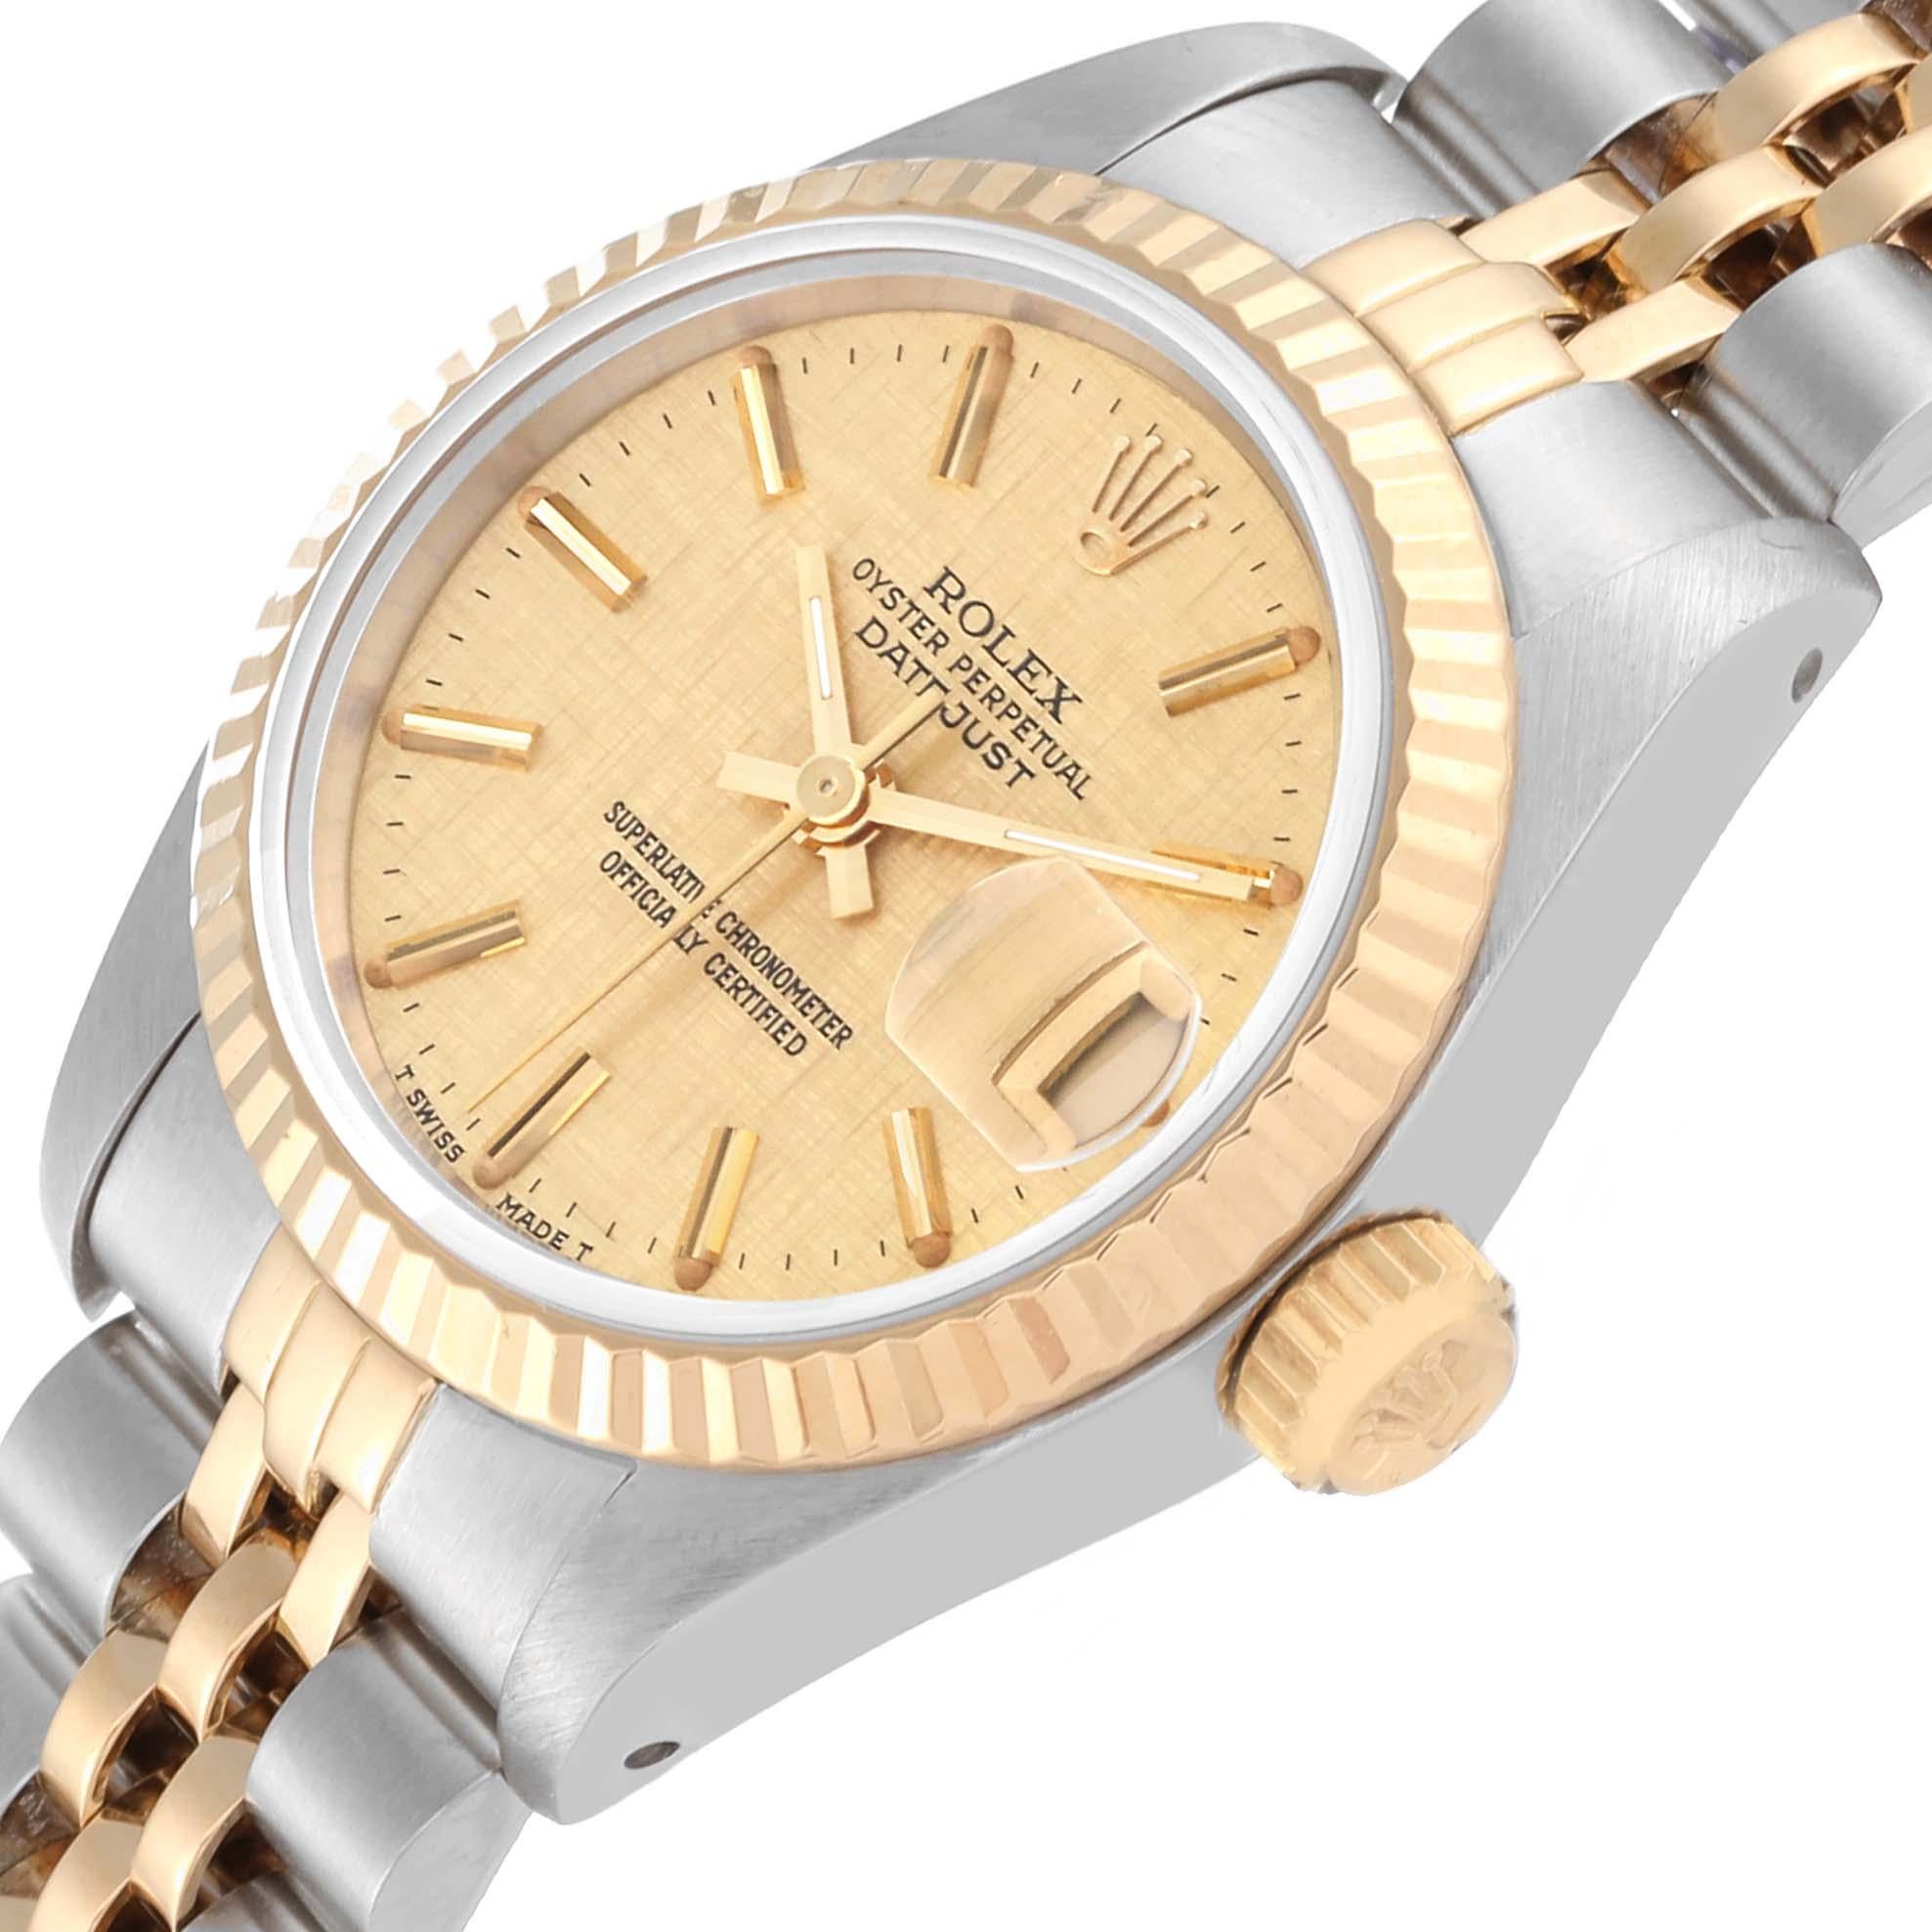 Rolex Datejust Champagne Linen Dial Steel Yellow Gold Ladies Watch 69173. Officially certified chronometer automatic self-winding movement. Stainless steel oyster case 26.0 mm in diameter. Rolex logo on the crown. 18k yellow gold fluted bezel.